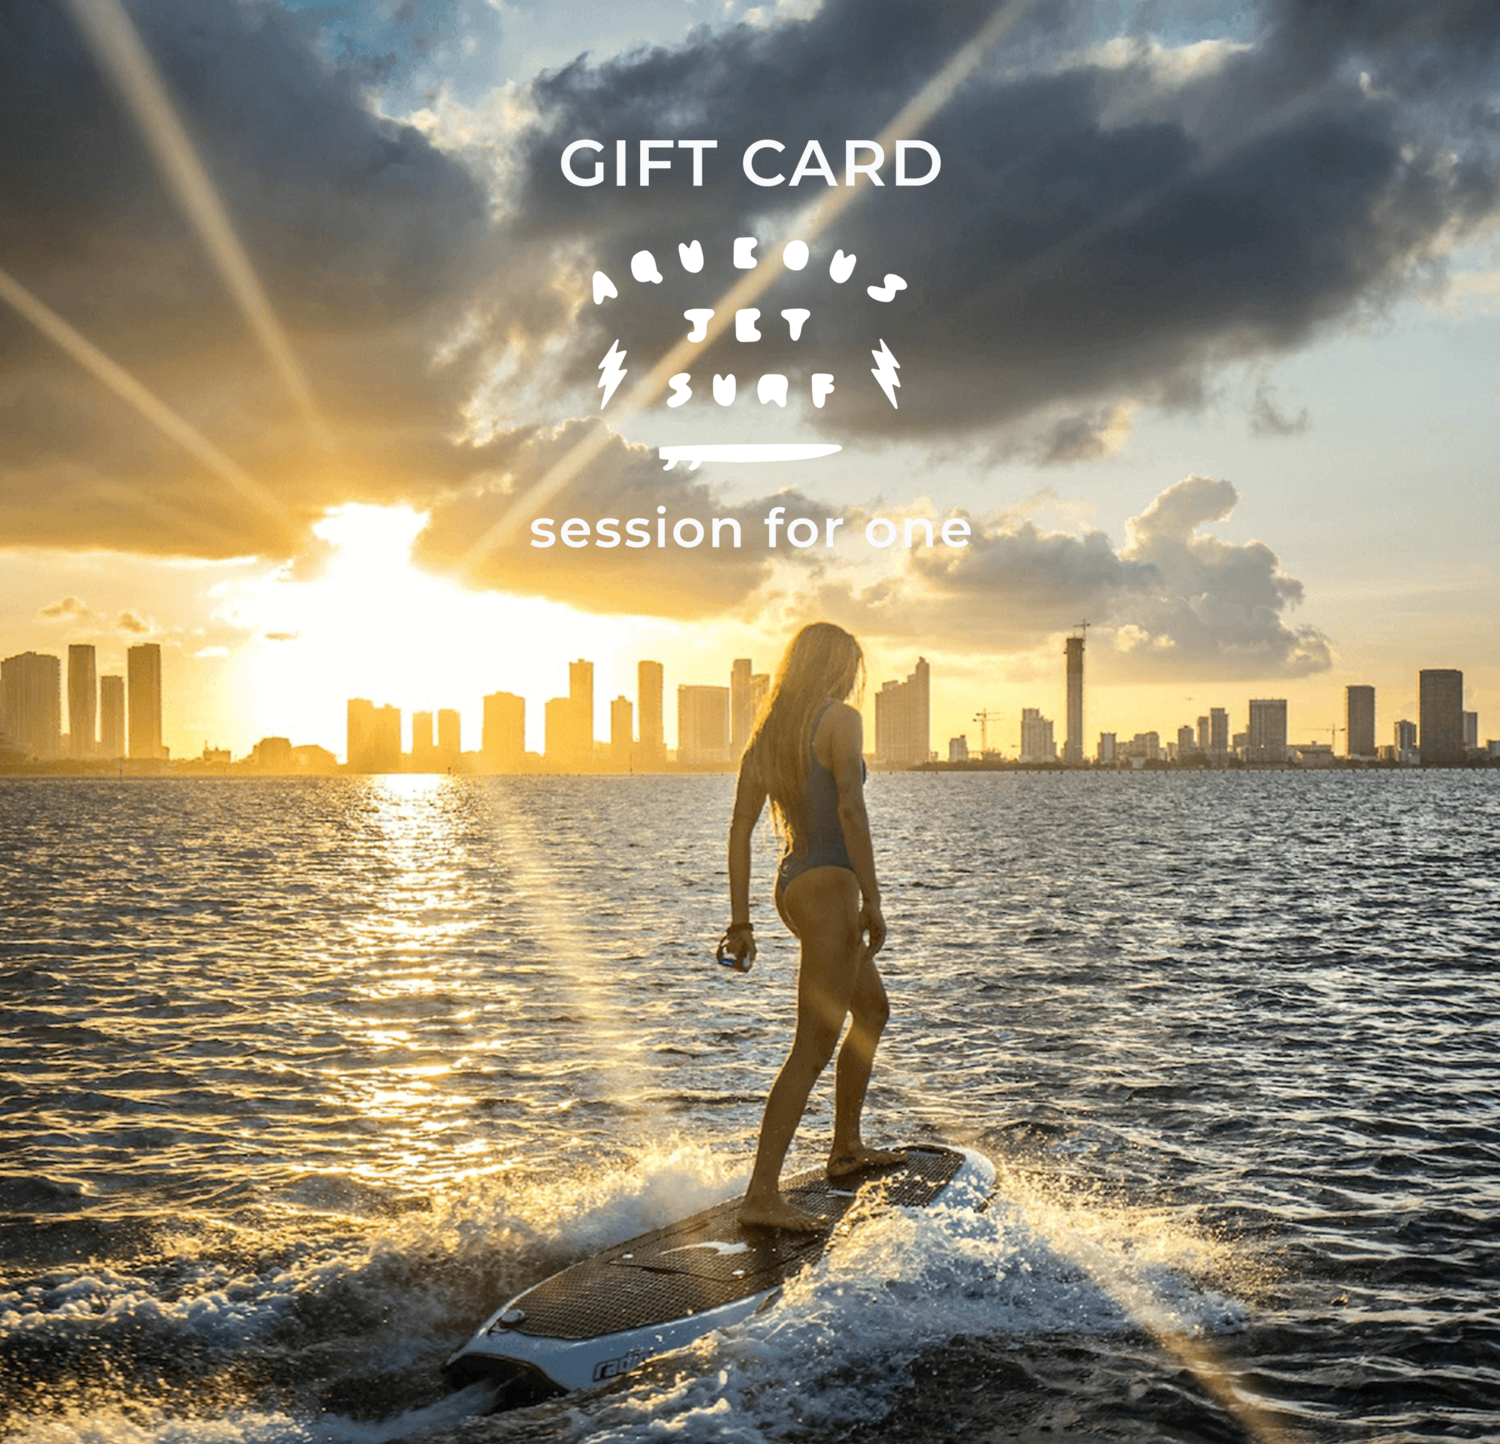 GIFT CARD | SESSION FOR 1